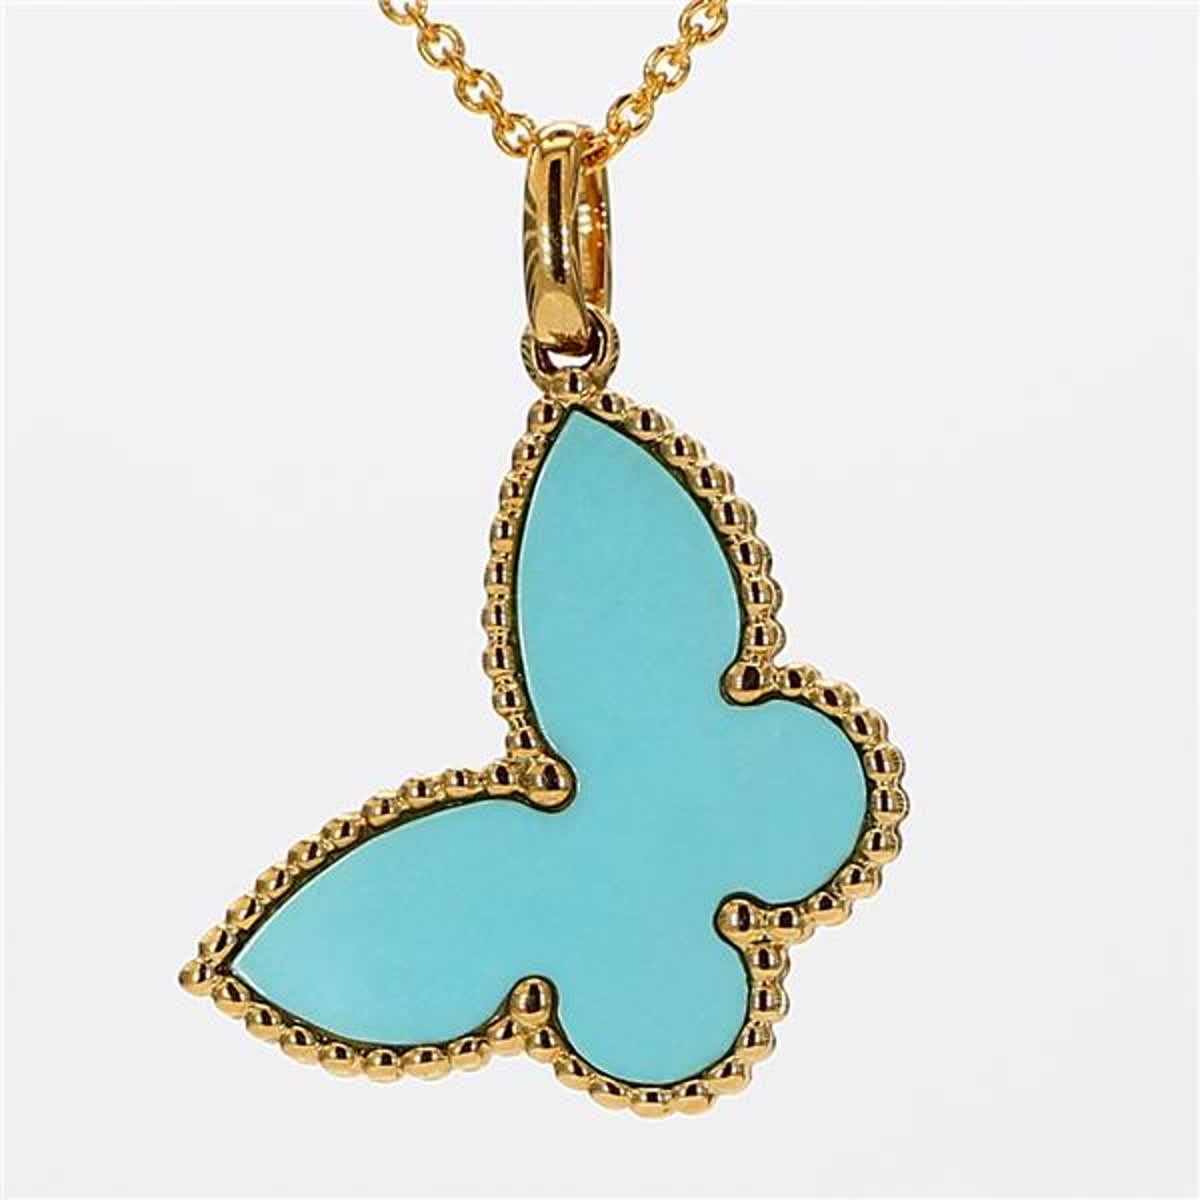 RareGemWorld's classic turquoise and pearl pendant. Mounted in a beautiful 18K Yellow Gold setting with a butterfly shape natural turquoise and a butterfly shape natural pearl. This pendant is guaranteed to impress and enhance your personal